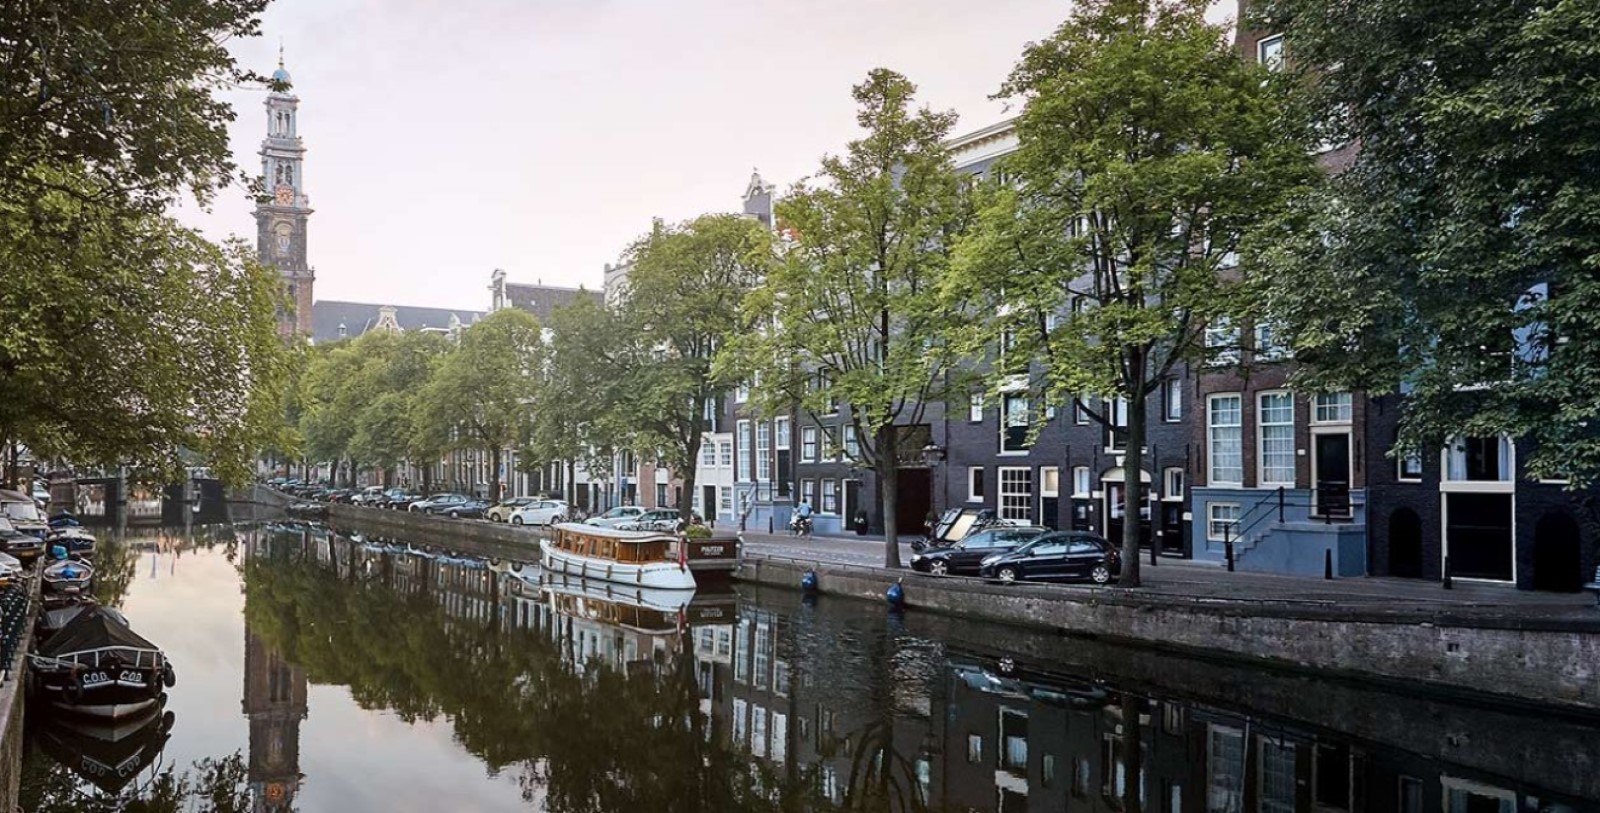 Explore the Anne Frank House, the De Nieuwe Kerk, and the Royal Palace of Amsterdam steps from the hotel.